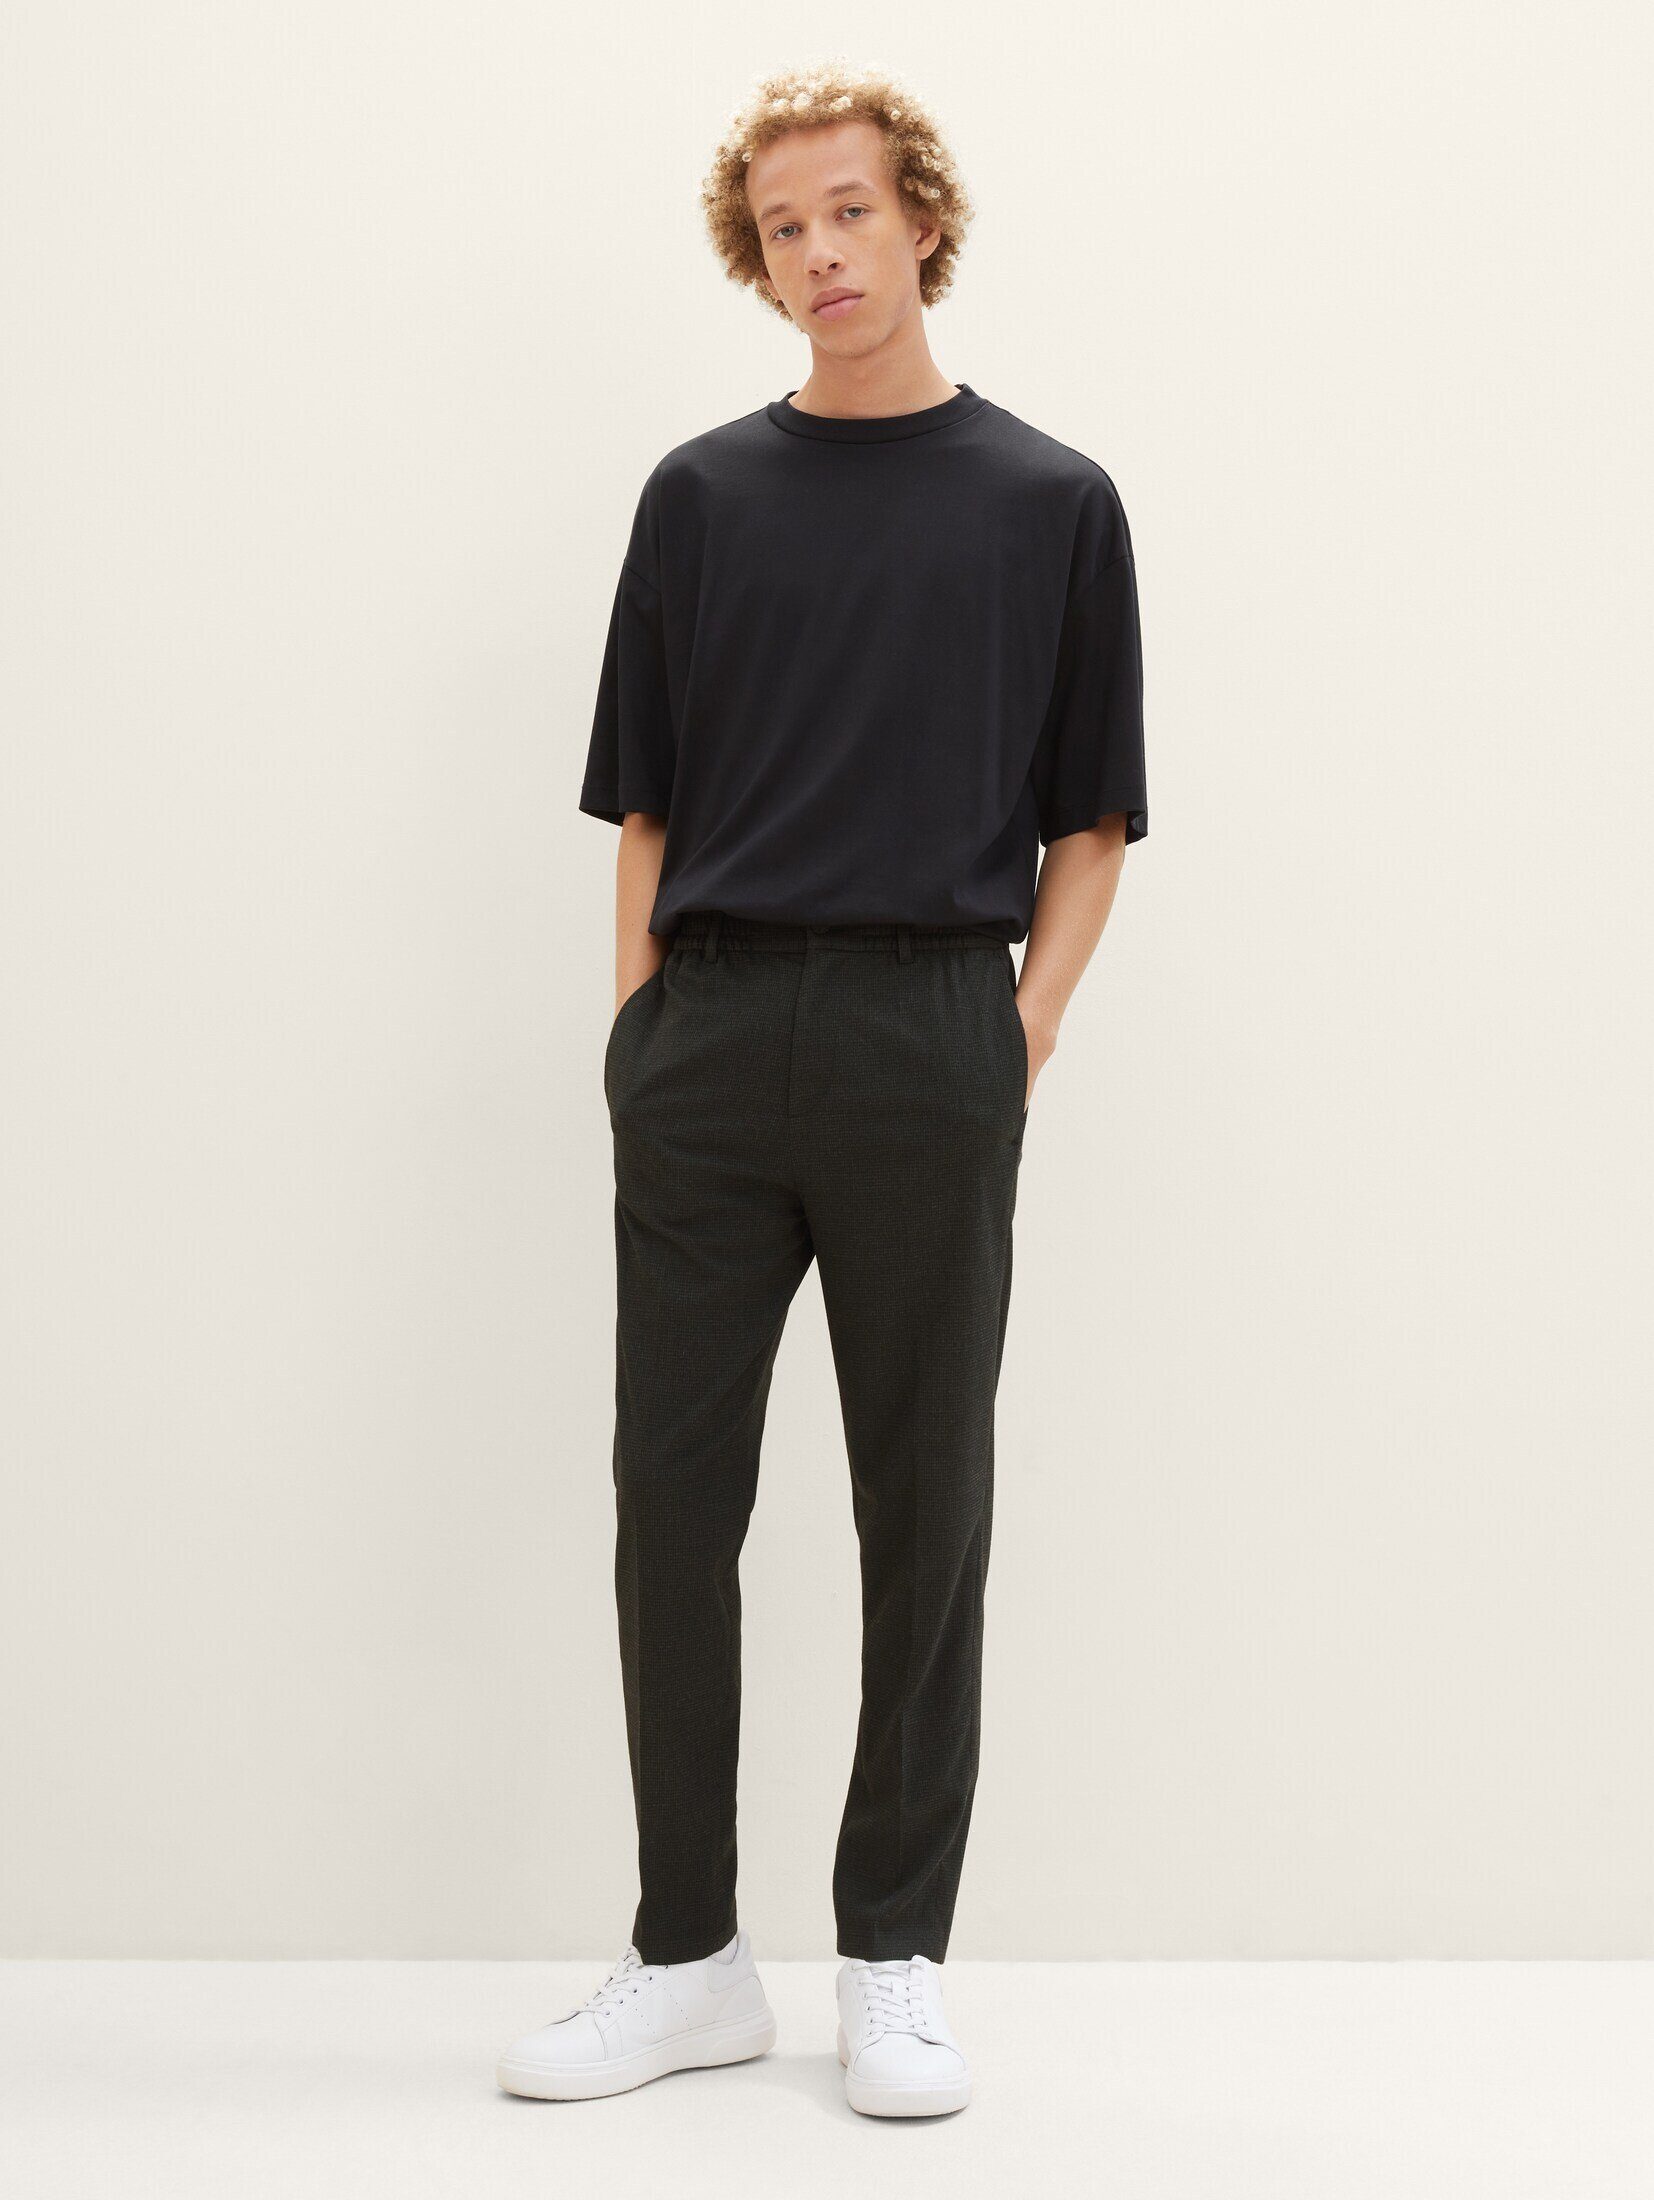 TOM TAILOR Denim Chinohose Relaxed Tapered Chino black houndstooth